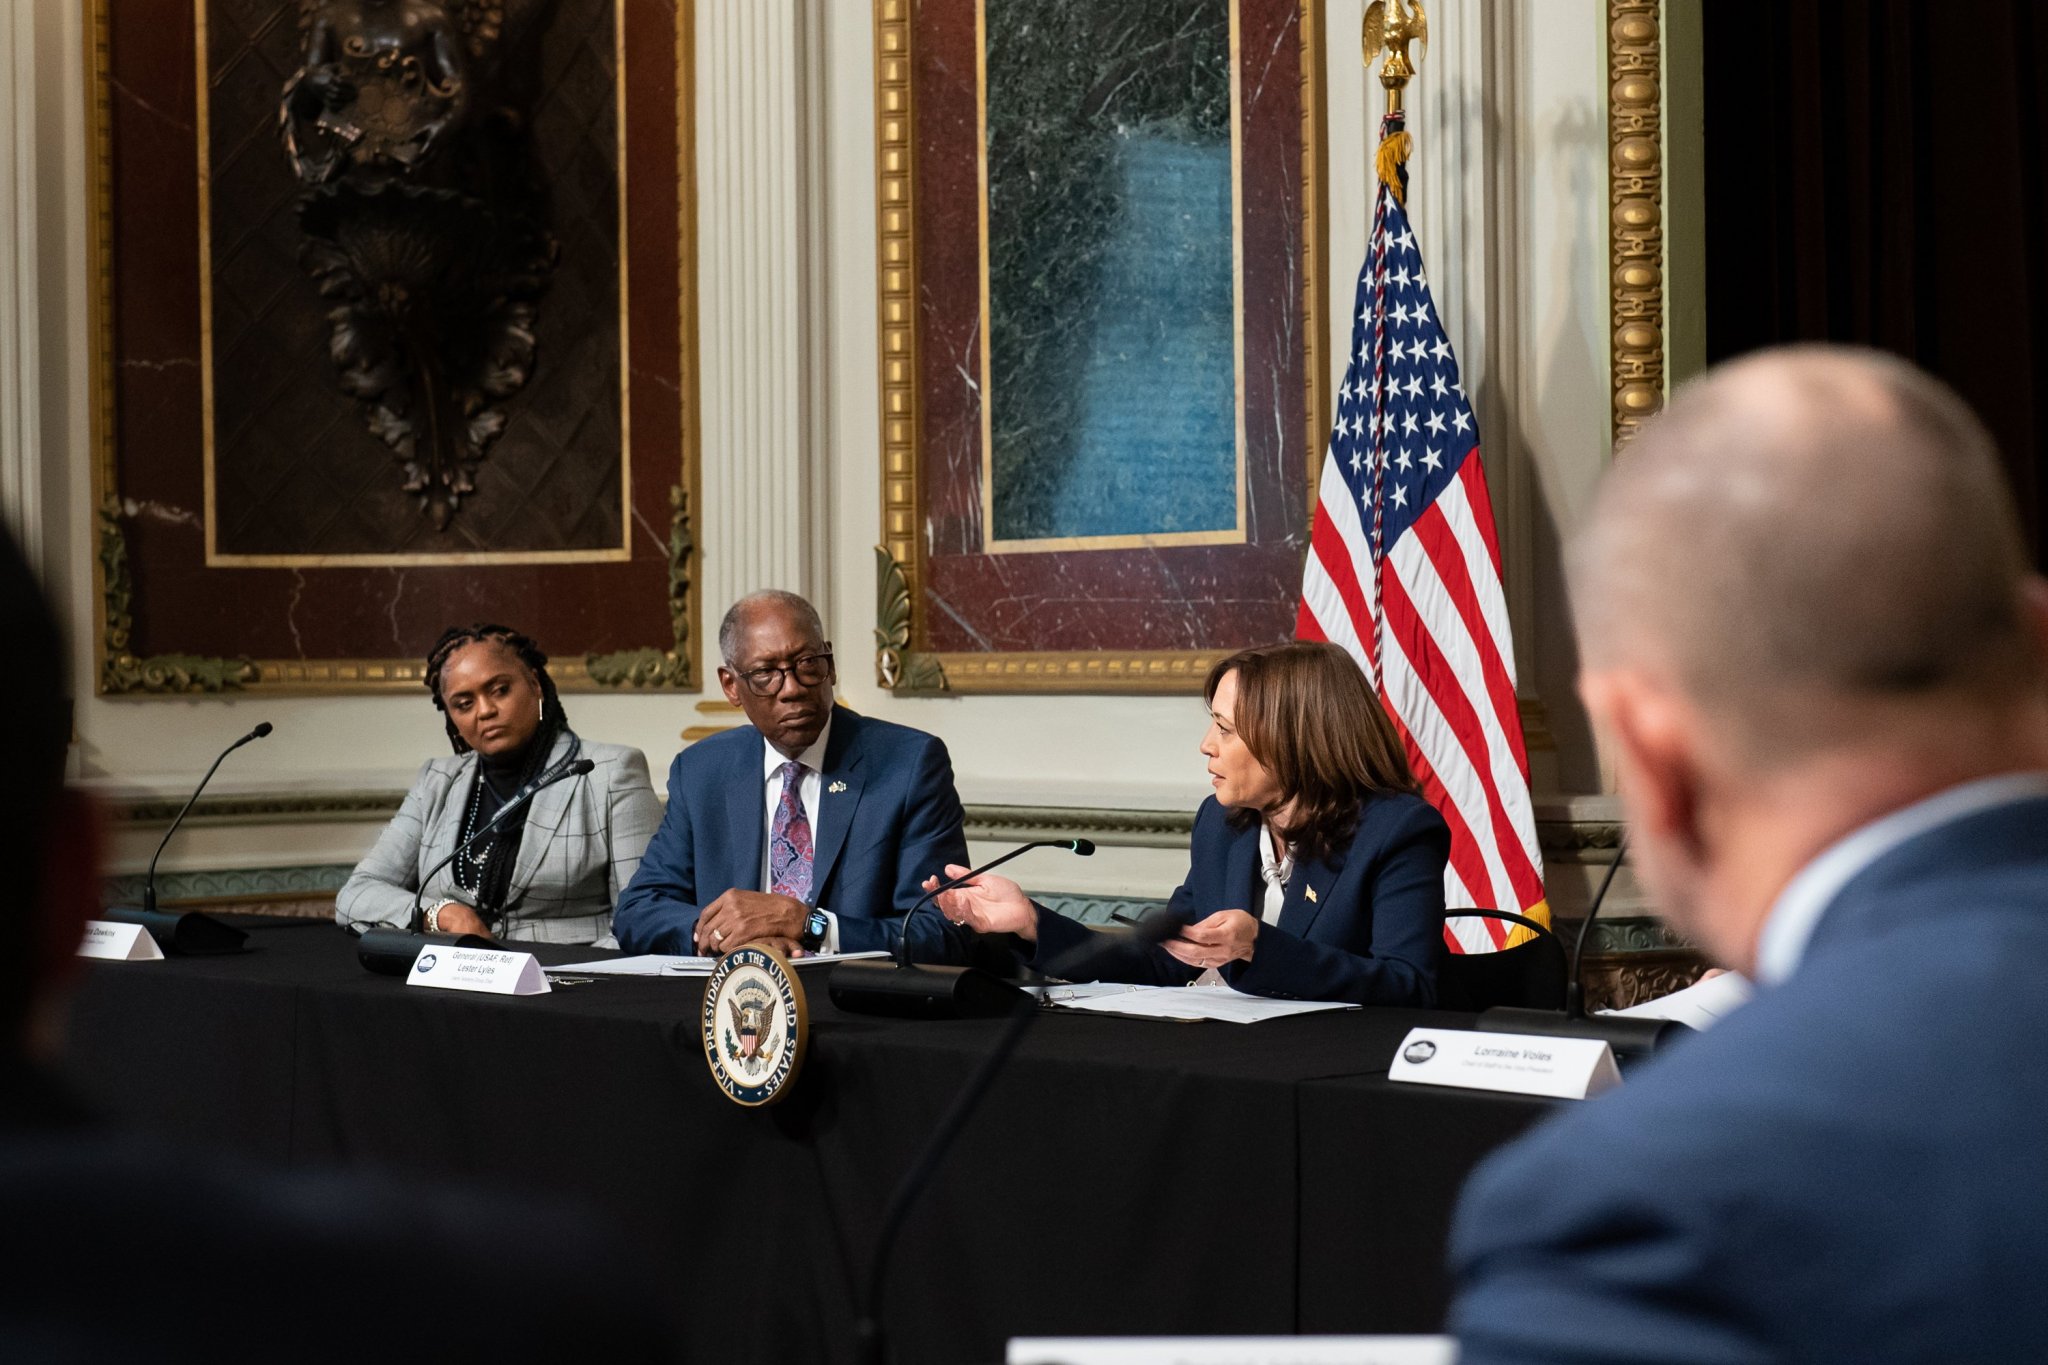 Members of the Users' Advisory Group sit at a table listening to Vice President Kamala Harris speak.